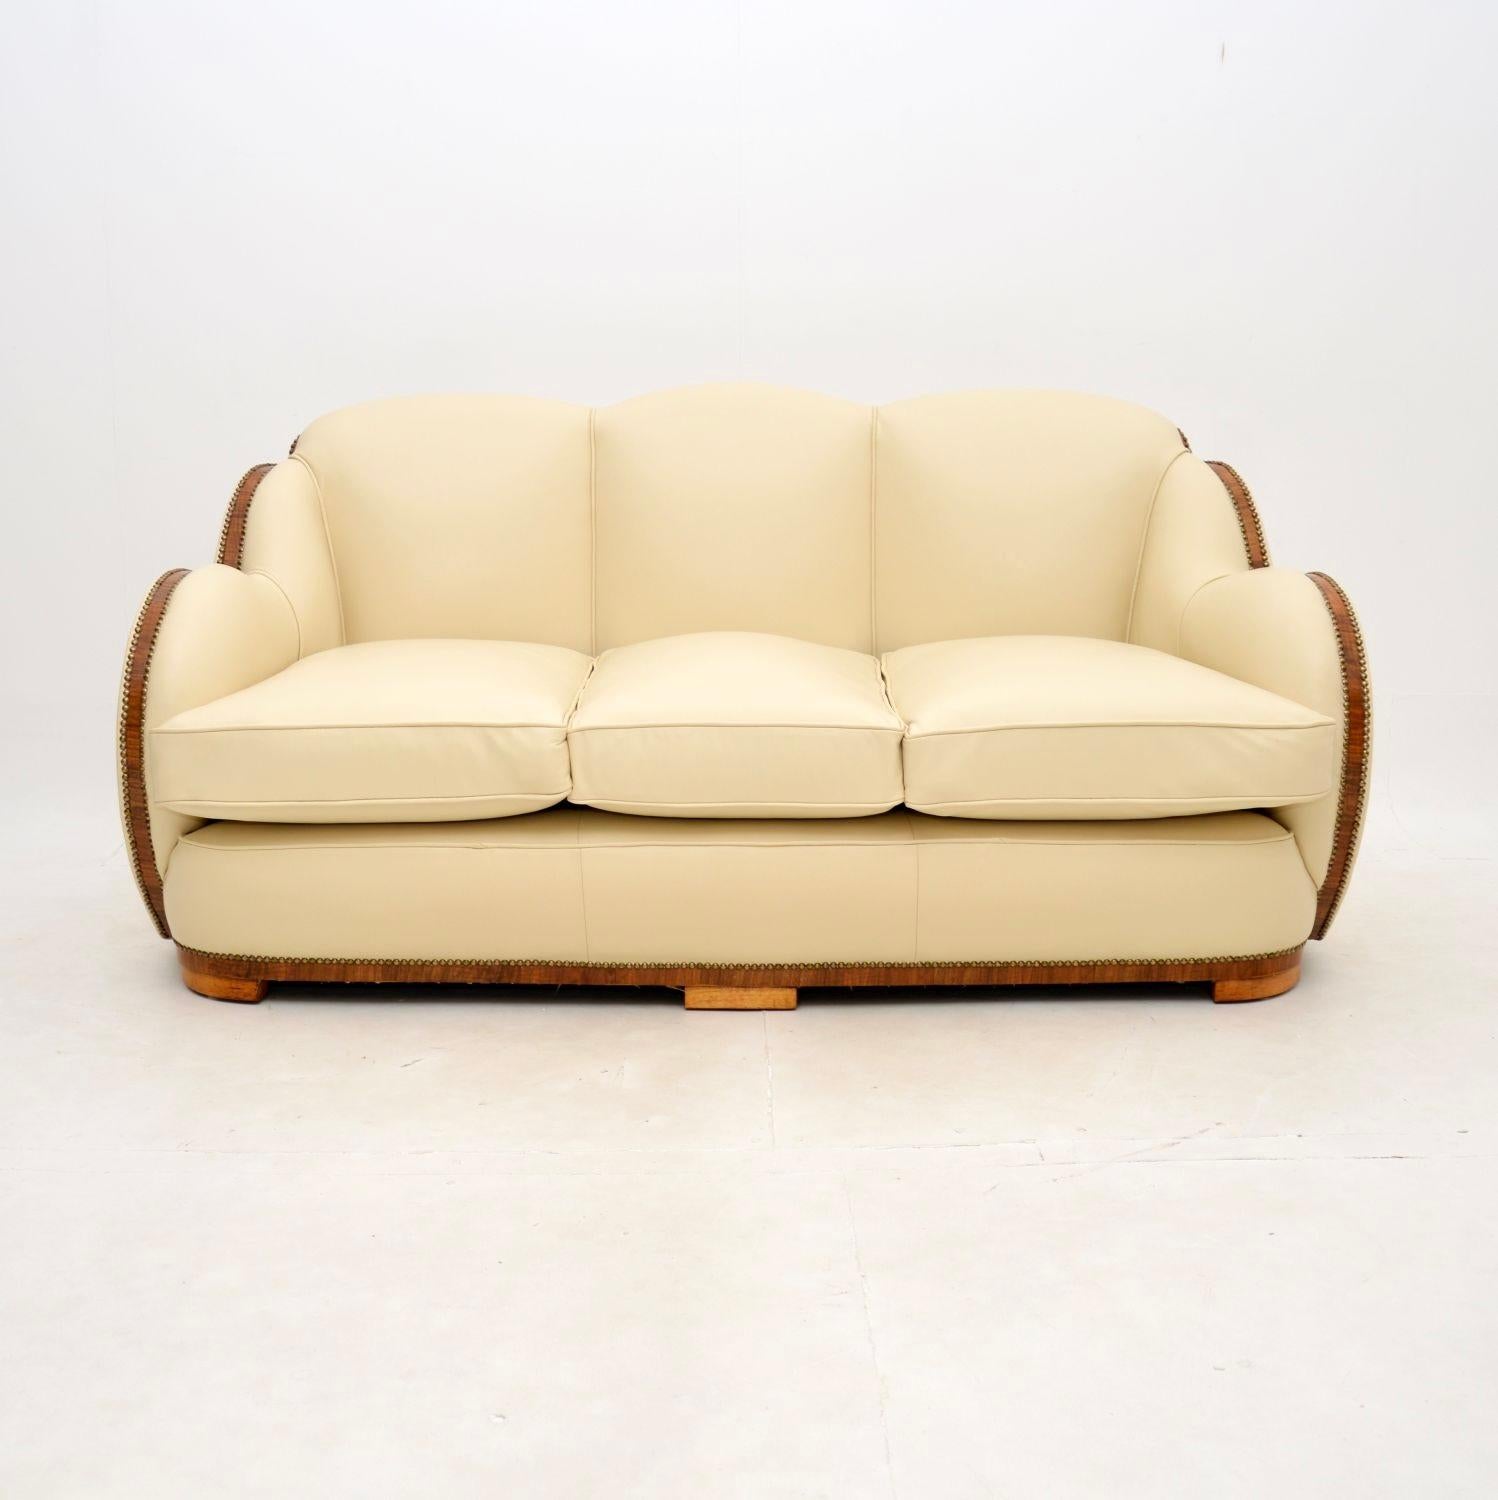 British Art Deco Walnut and Leather Cloud Back Armchairs and Sofa by Epstein